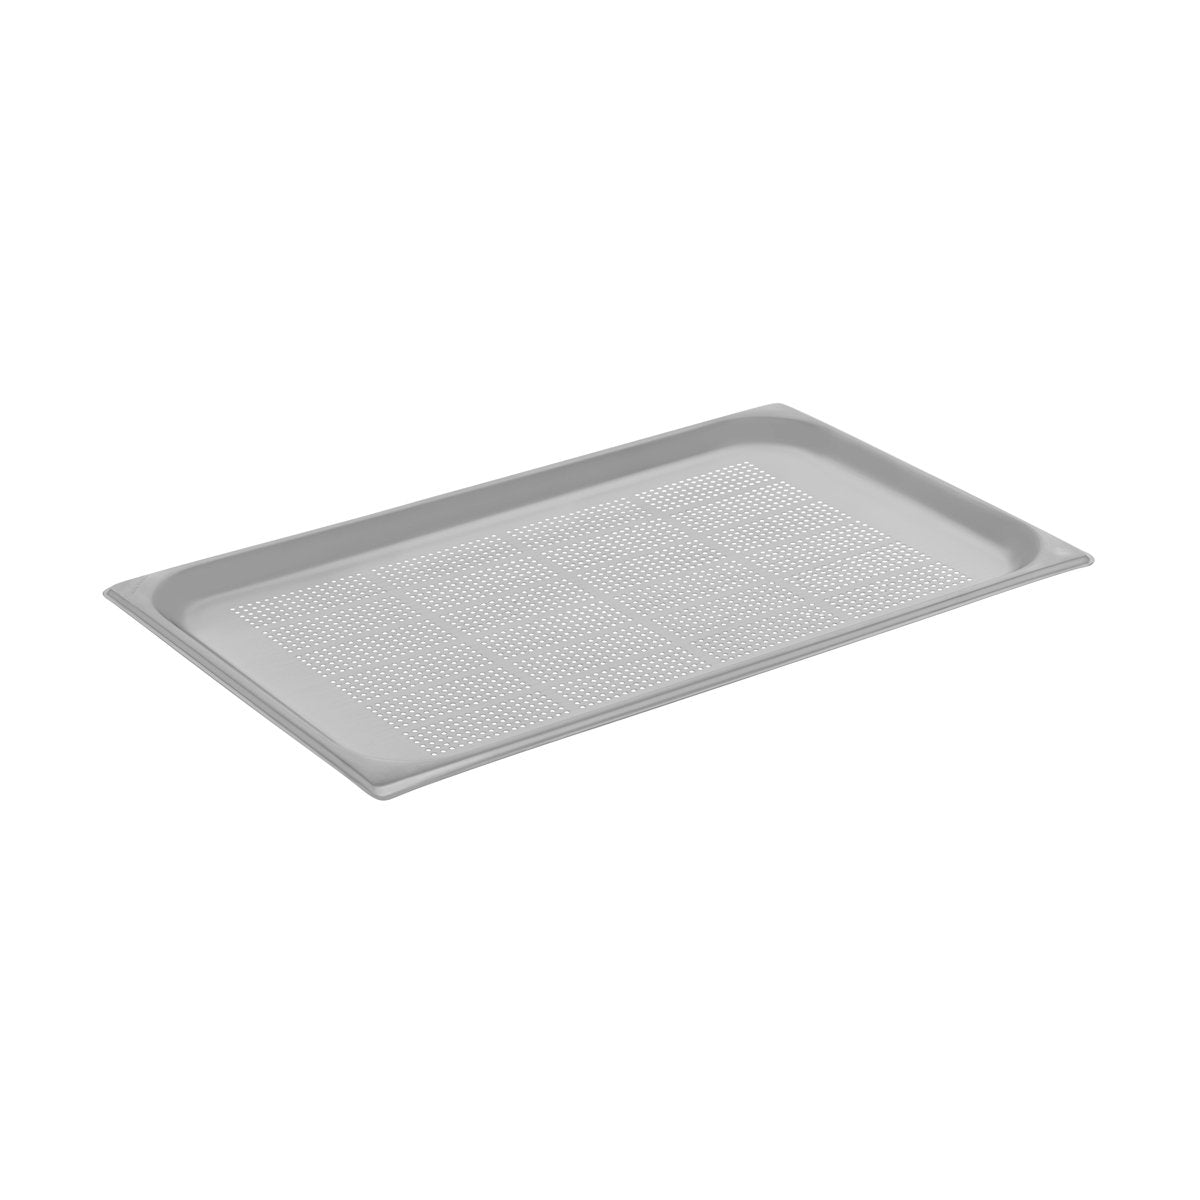 GNP-11020 Chef Inox Gastronorm Pan Perforated 1/1 Size 20mm Tomkin Australia Hospitality Supplies